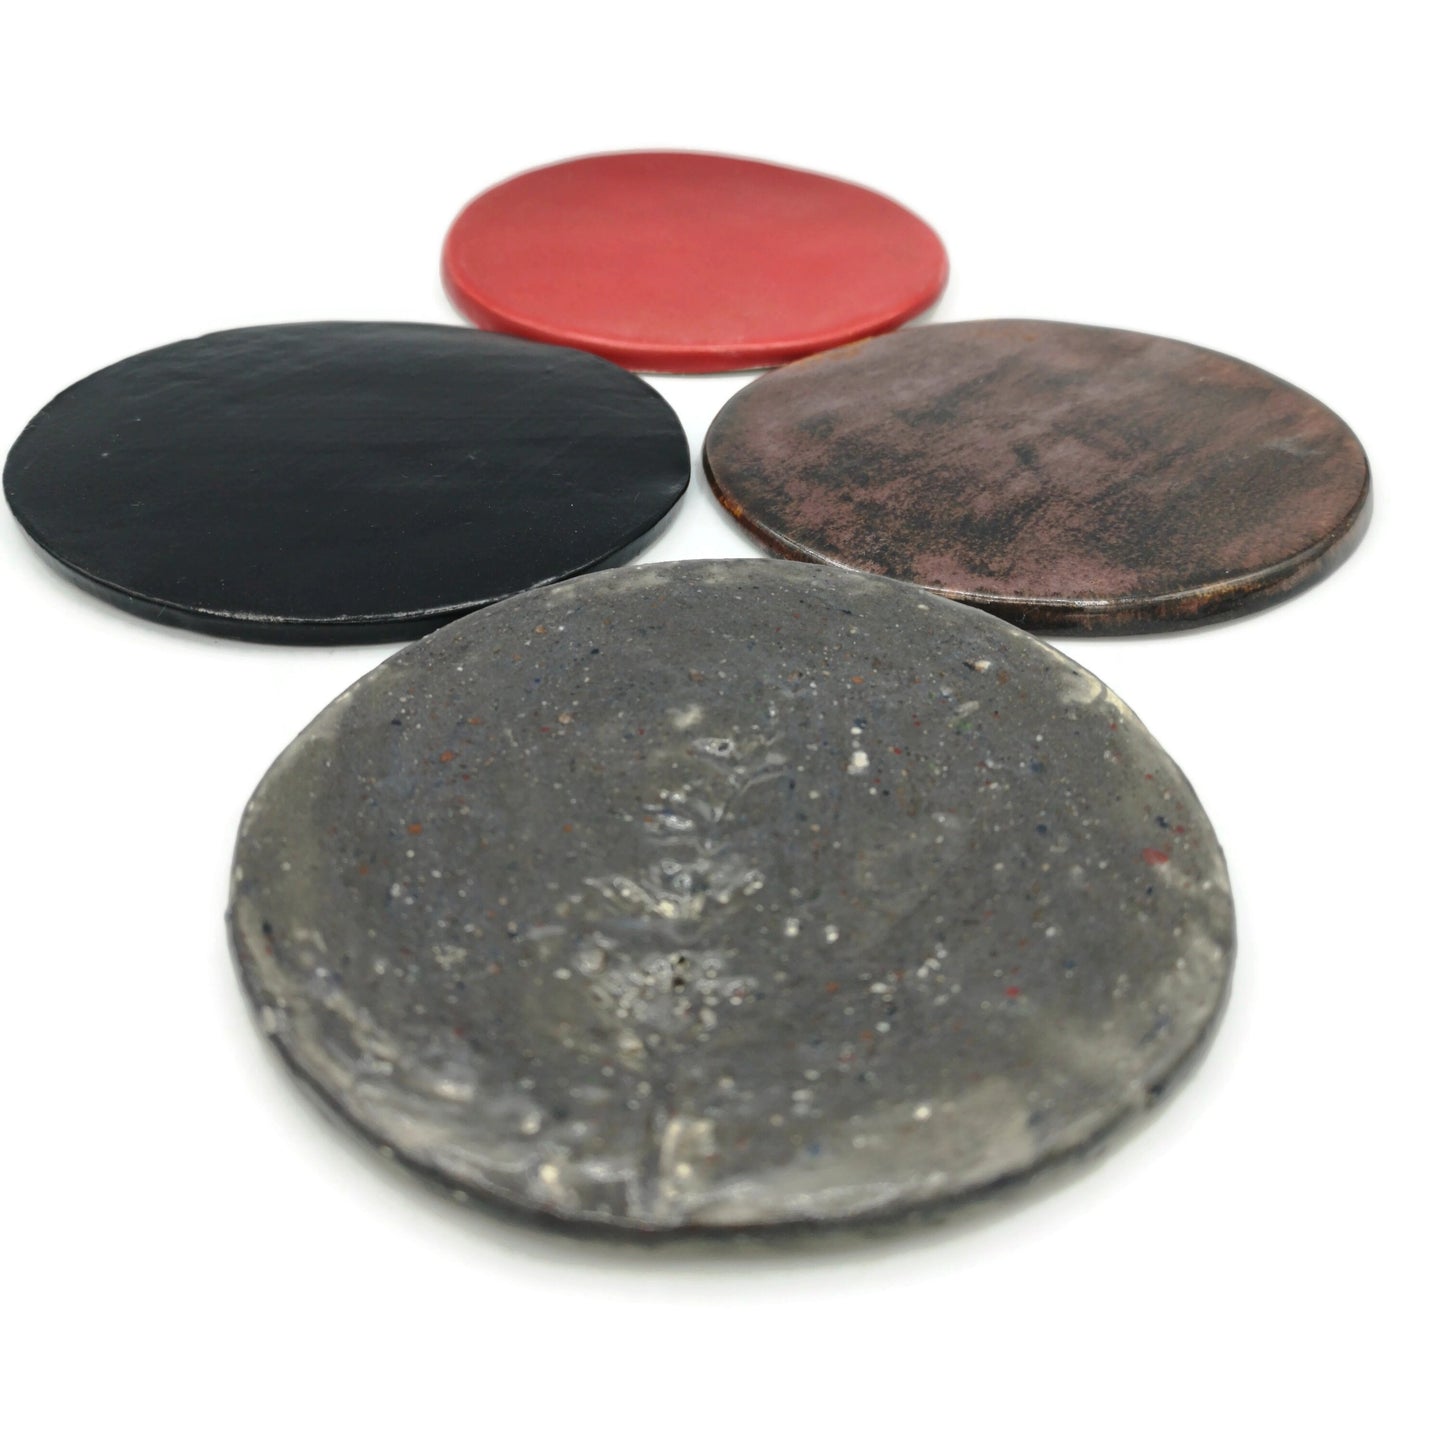 4Pc Assorted Handmade Round Cramic Coaster Tiles With Cork Back To Protect Your Office Desk, Colorful Mosaic Drink Coasters - Ceramica Ana Rafael